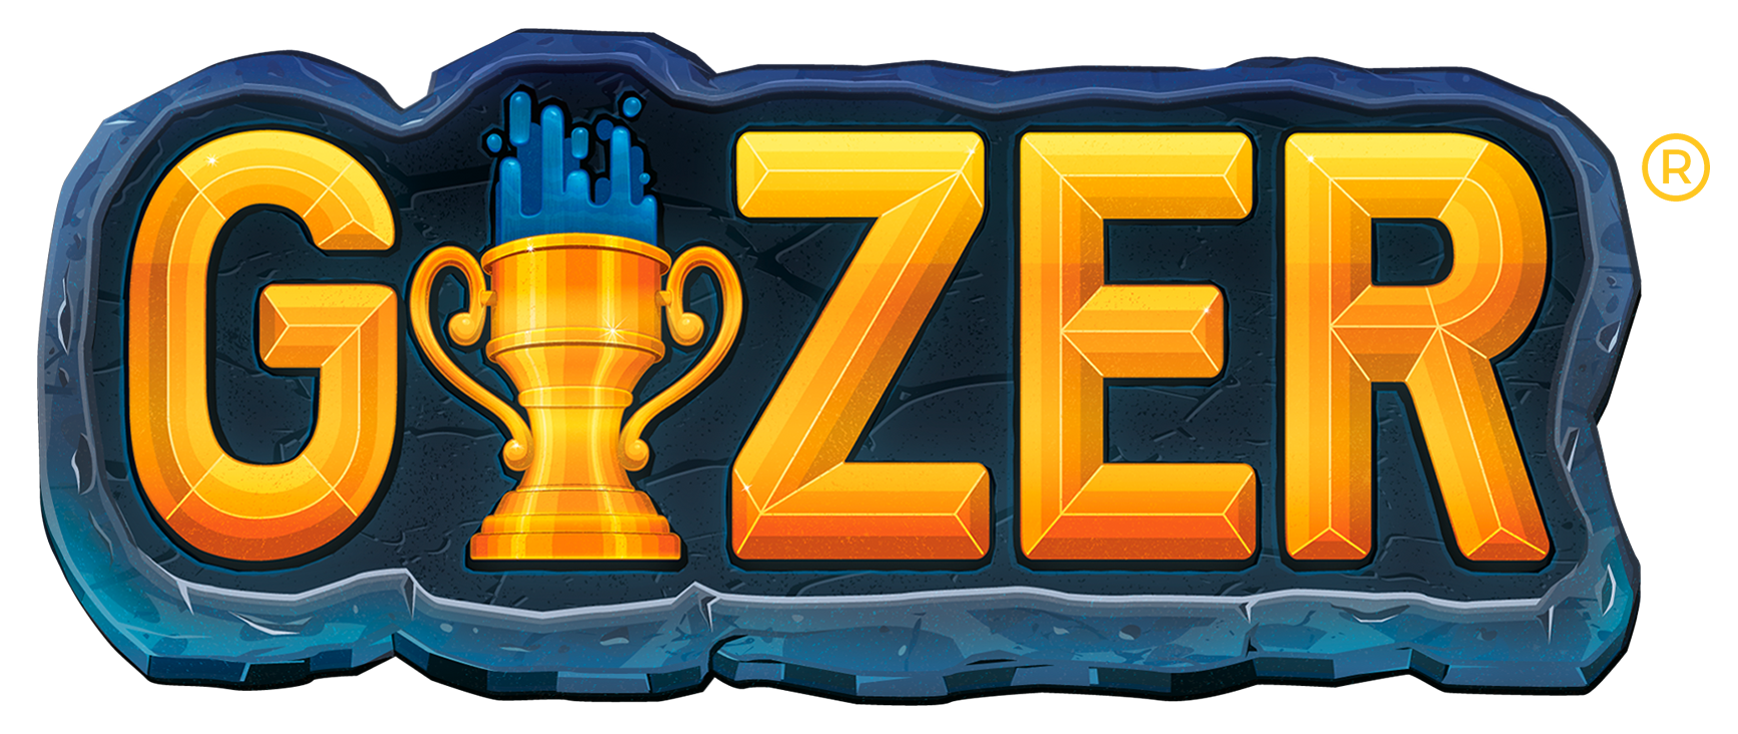 Join GIZER to compete. win $ and become a legend.